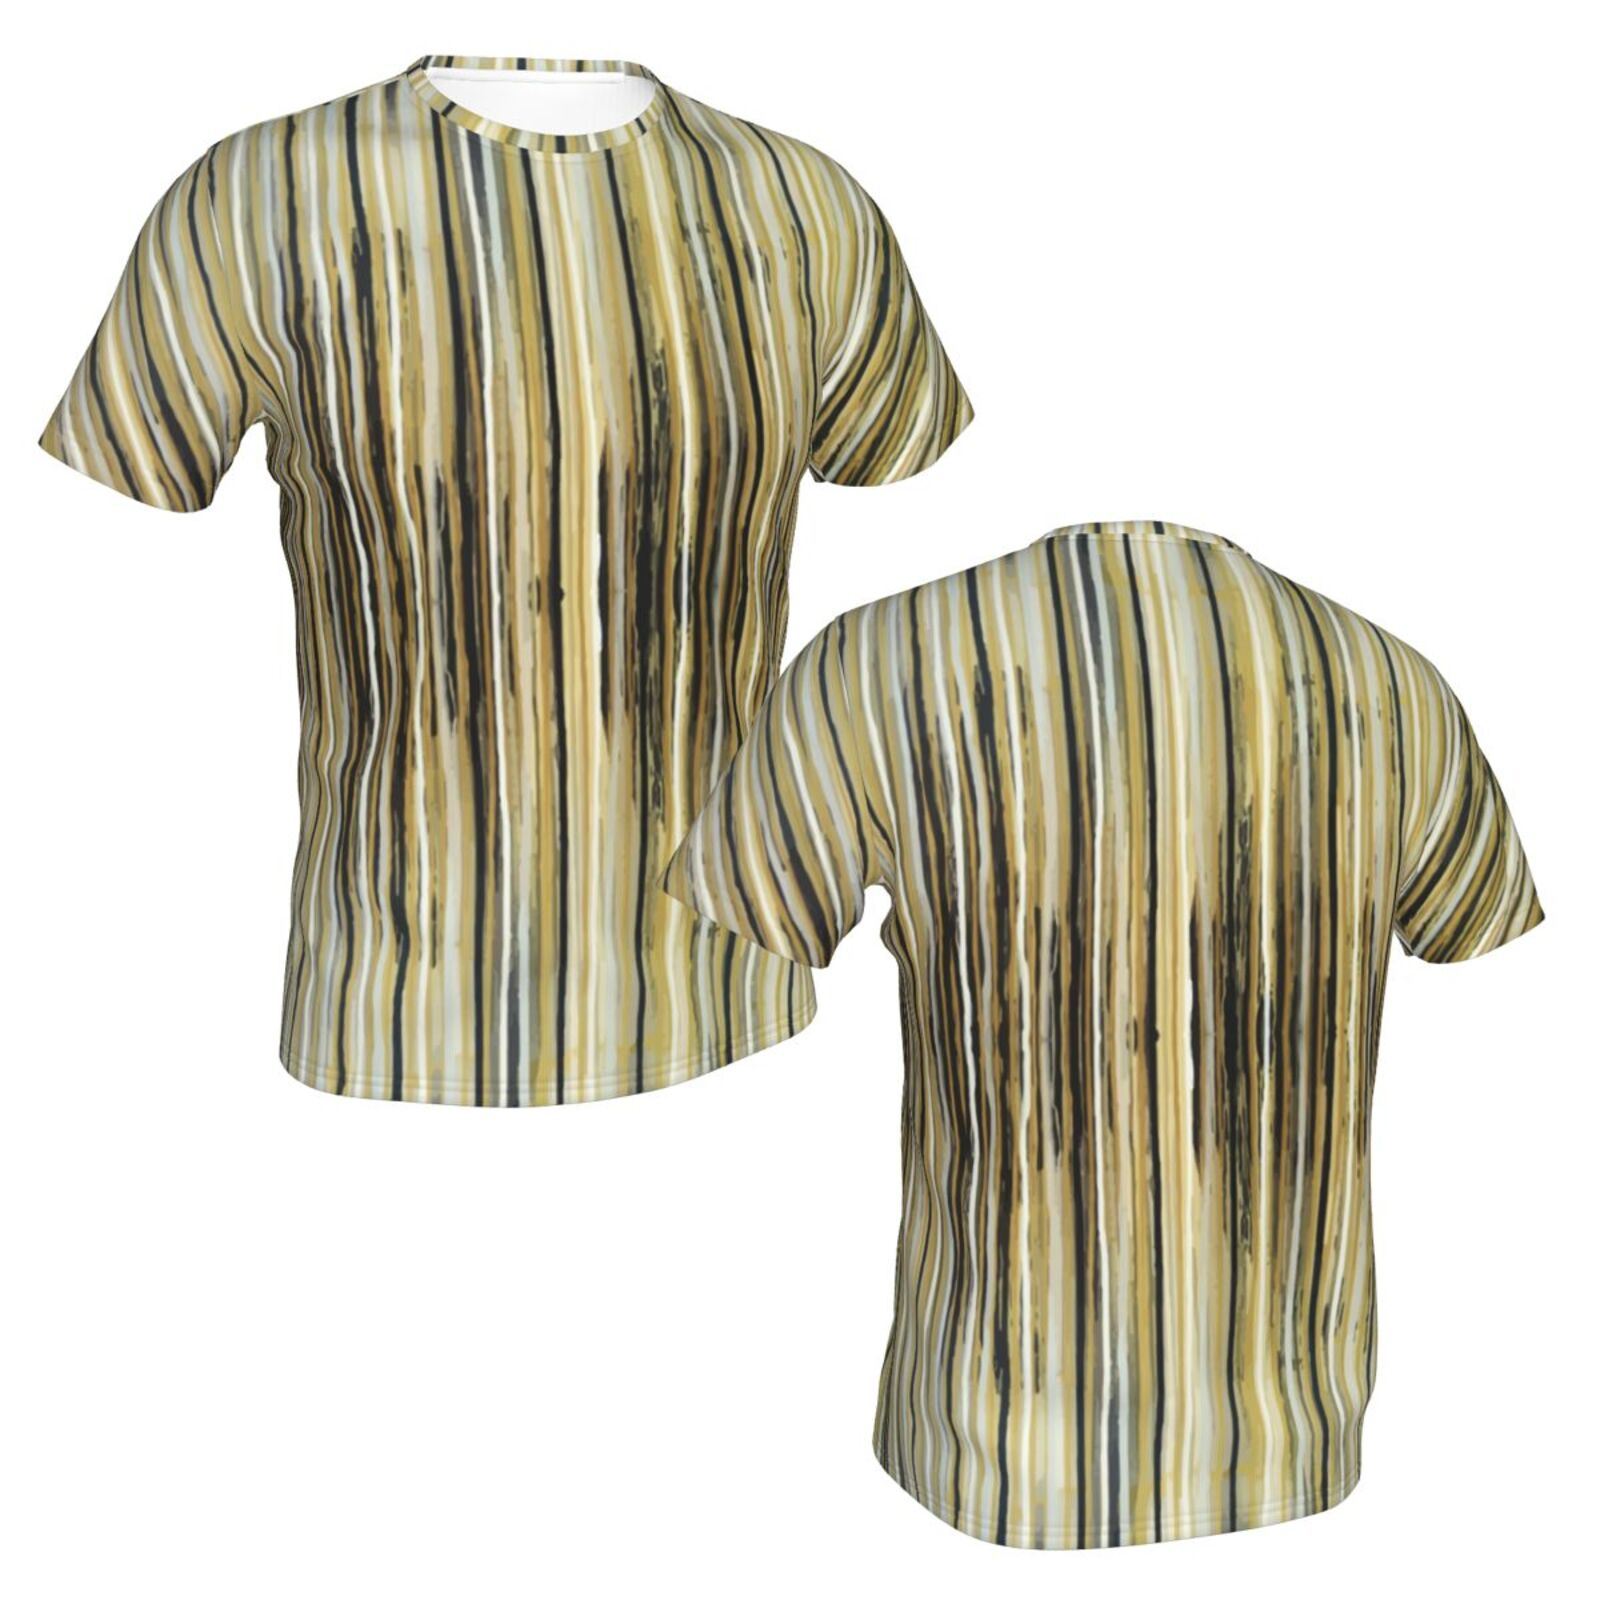 A Crush On Stripes Painting Elements Classic T-shirt